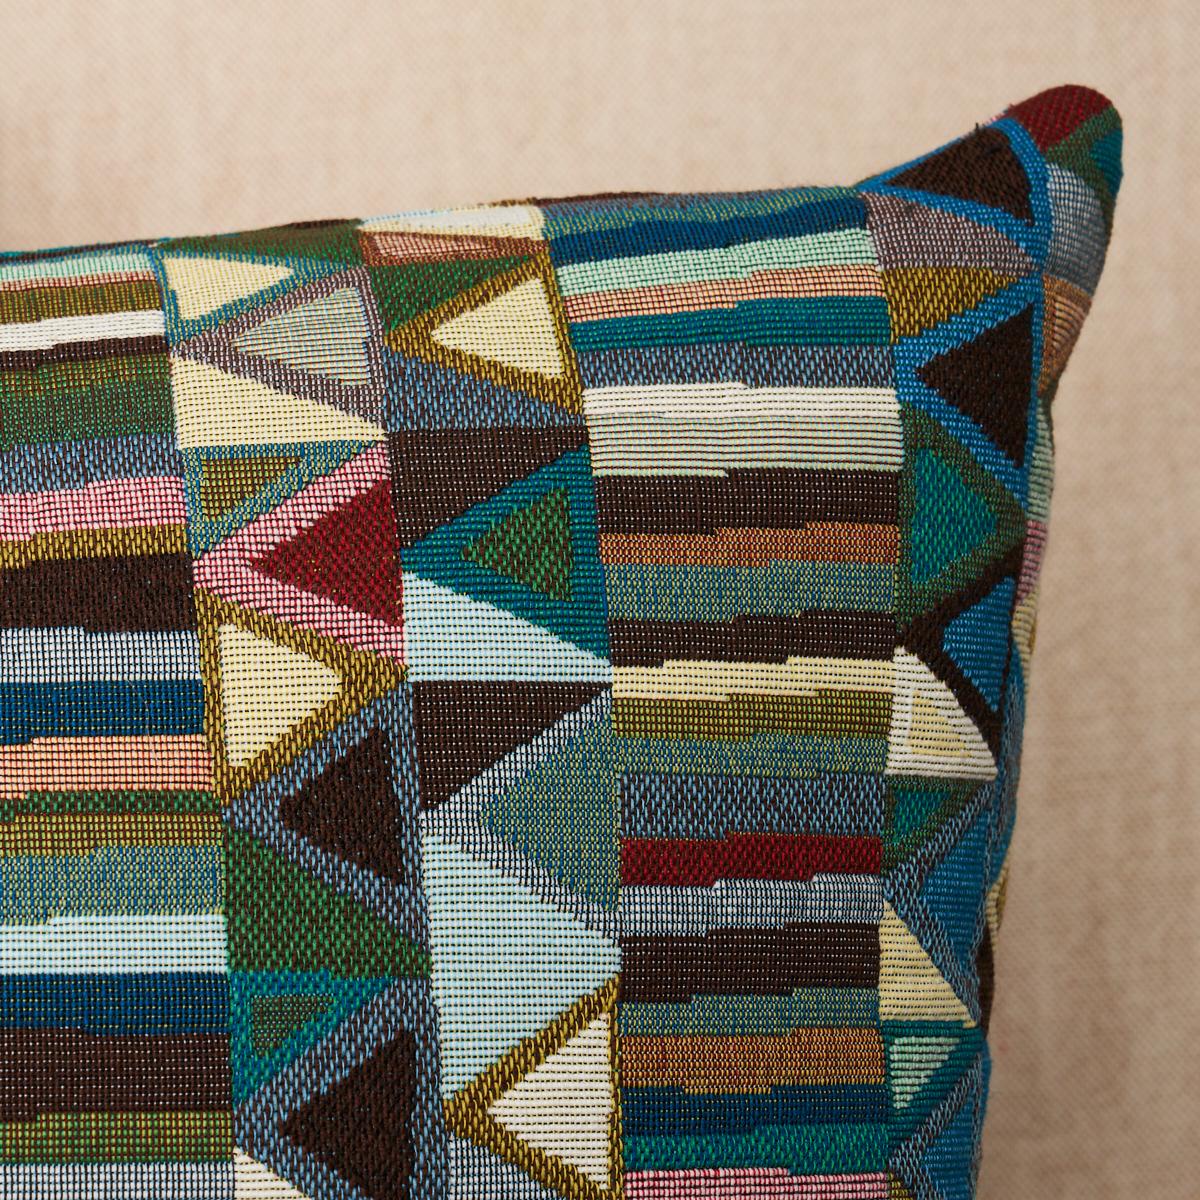 This pillow features Bizantino Quilted Weave with a knife edge finish. A sophisticated and stunning geometric with fabulous dimension, Bizantino Quilted Weave in peacock has the loft and tactile appeal of a matelassé. Pillow includes a feather/down